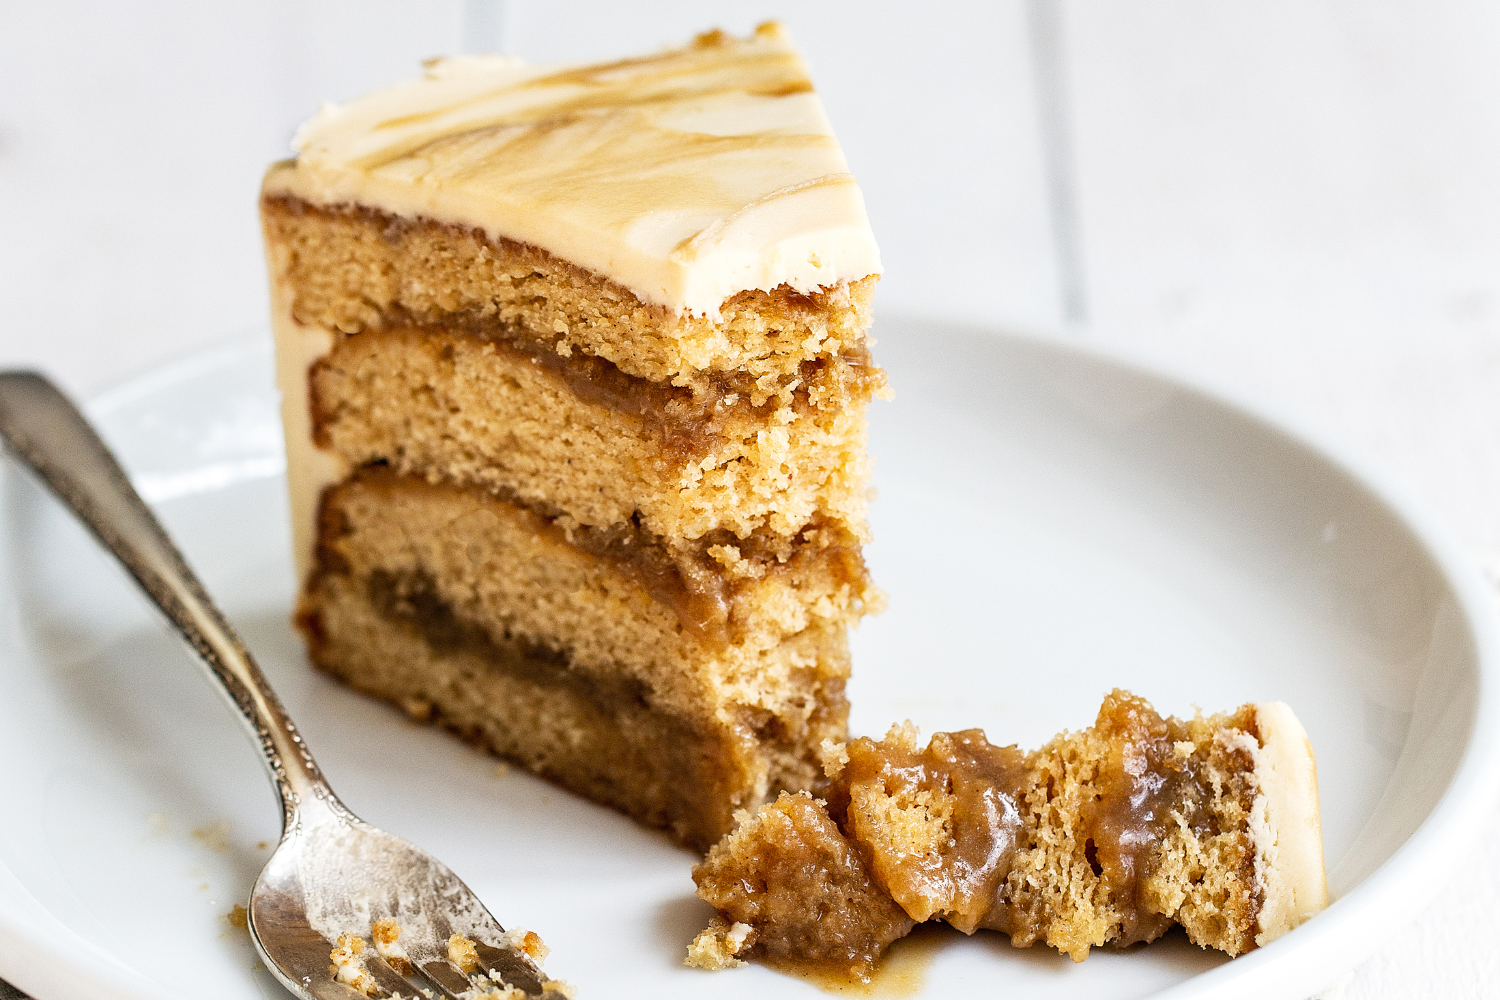 a slice of Butterscotch Cake with a bite taken out.